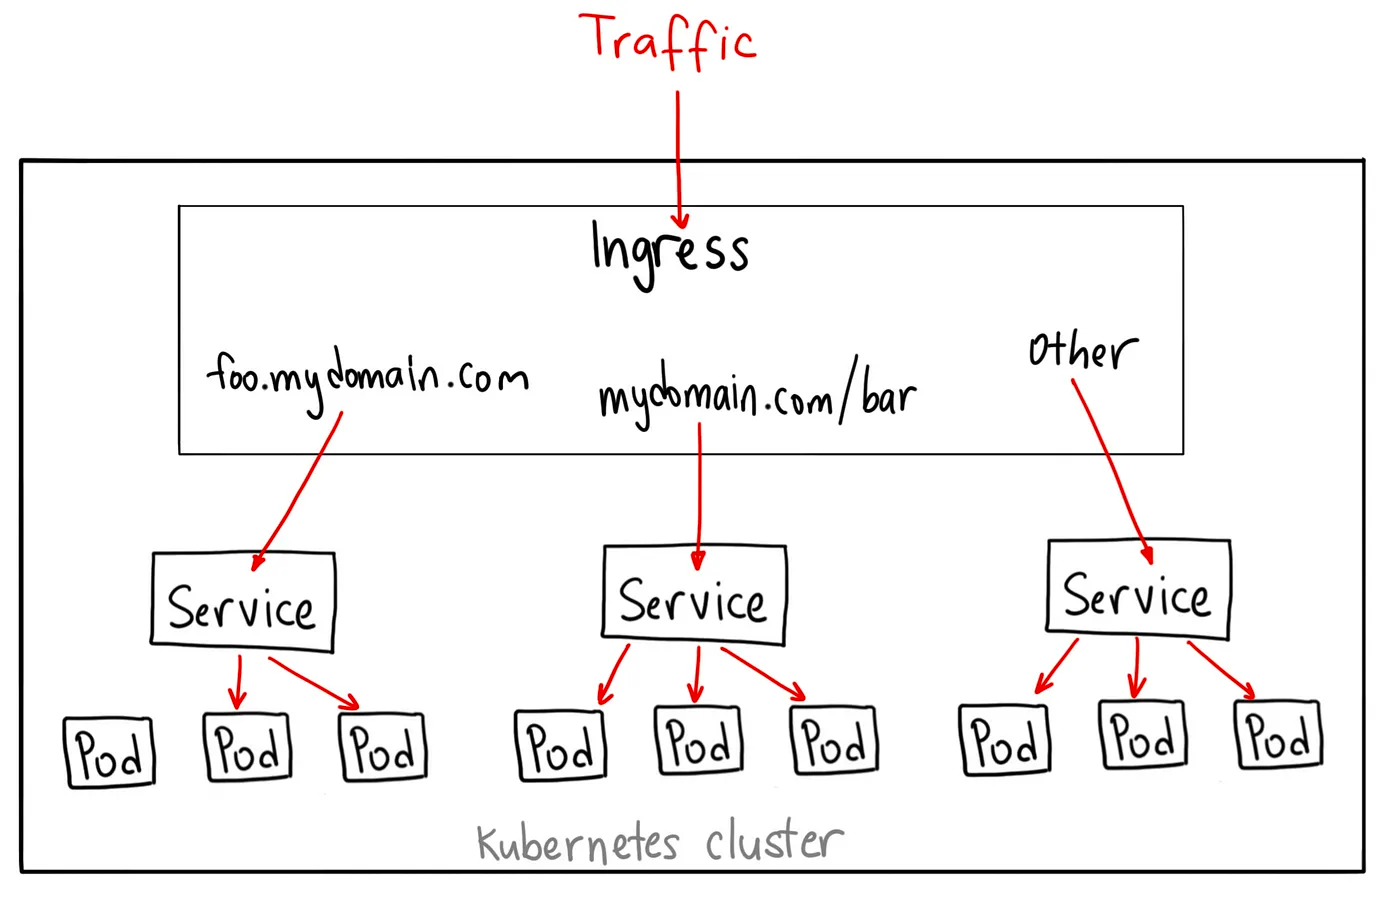 how to set a static ip for kubernetes load balancer